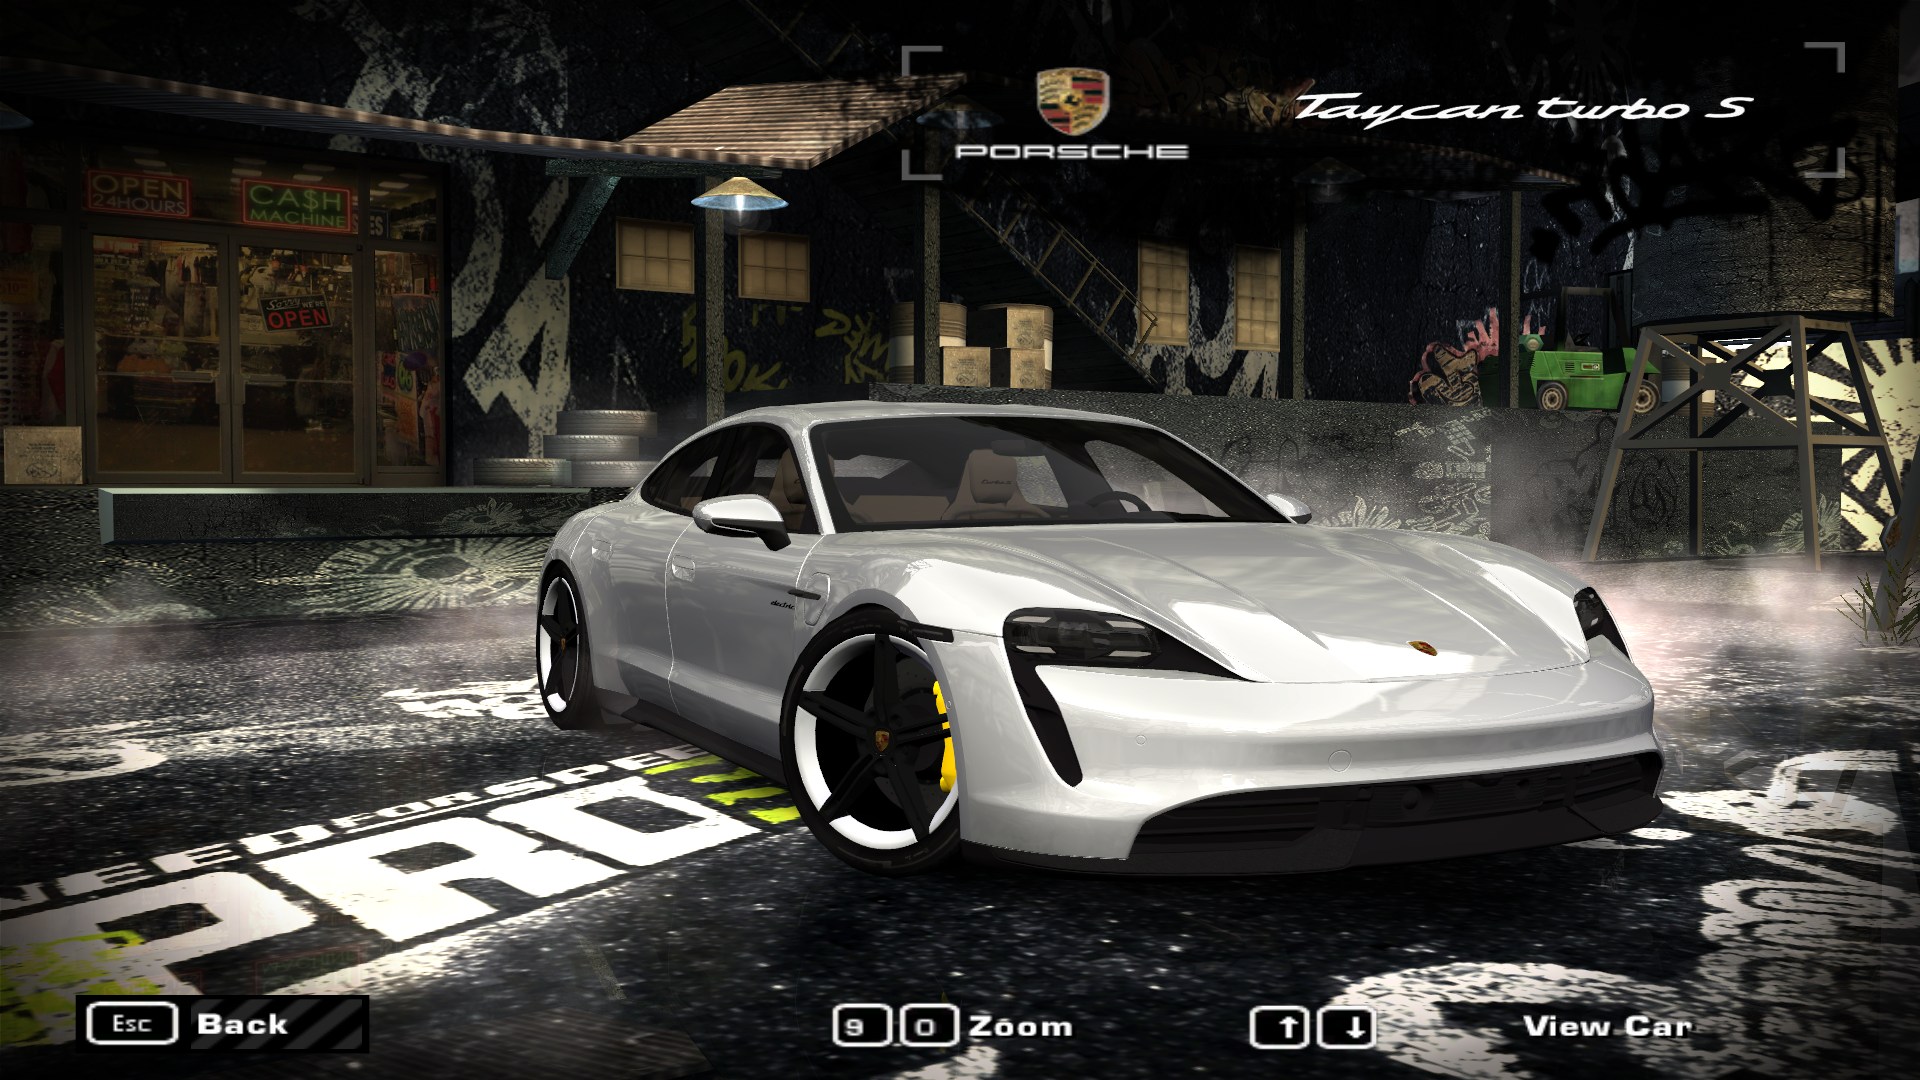 NFSAddons: Your Need for Speed Download Source